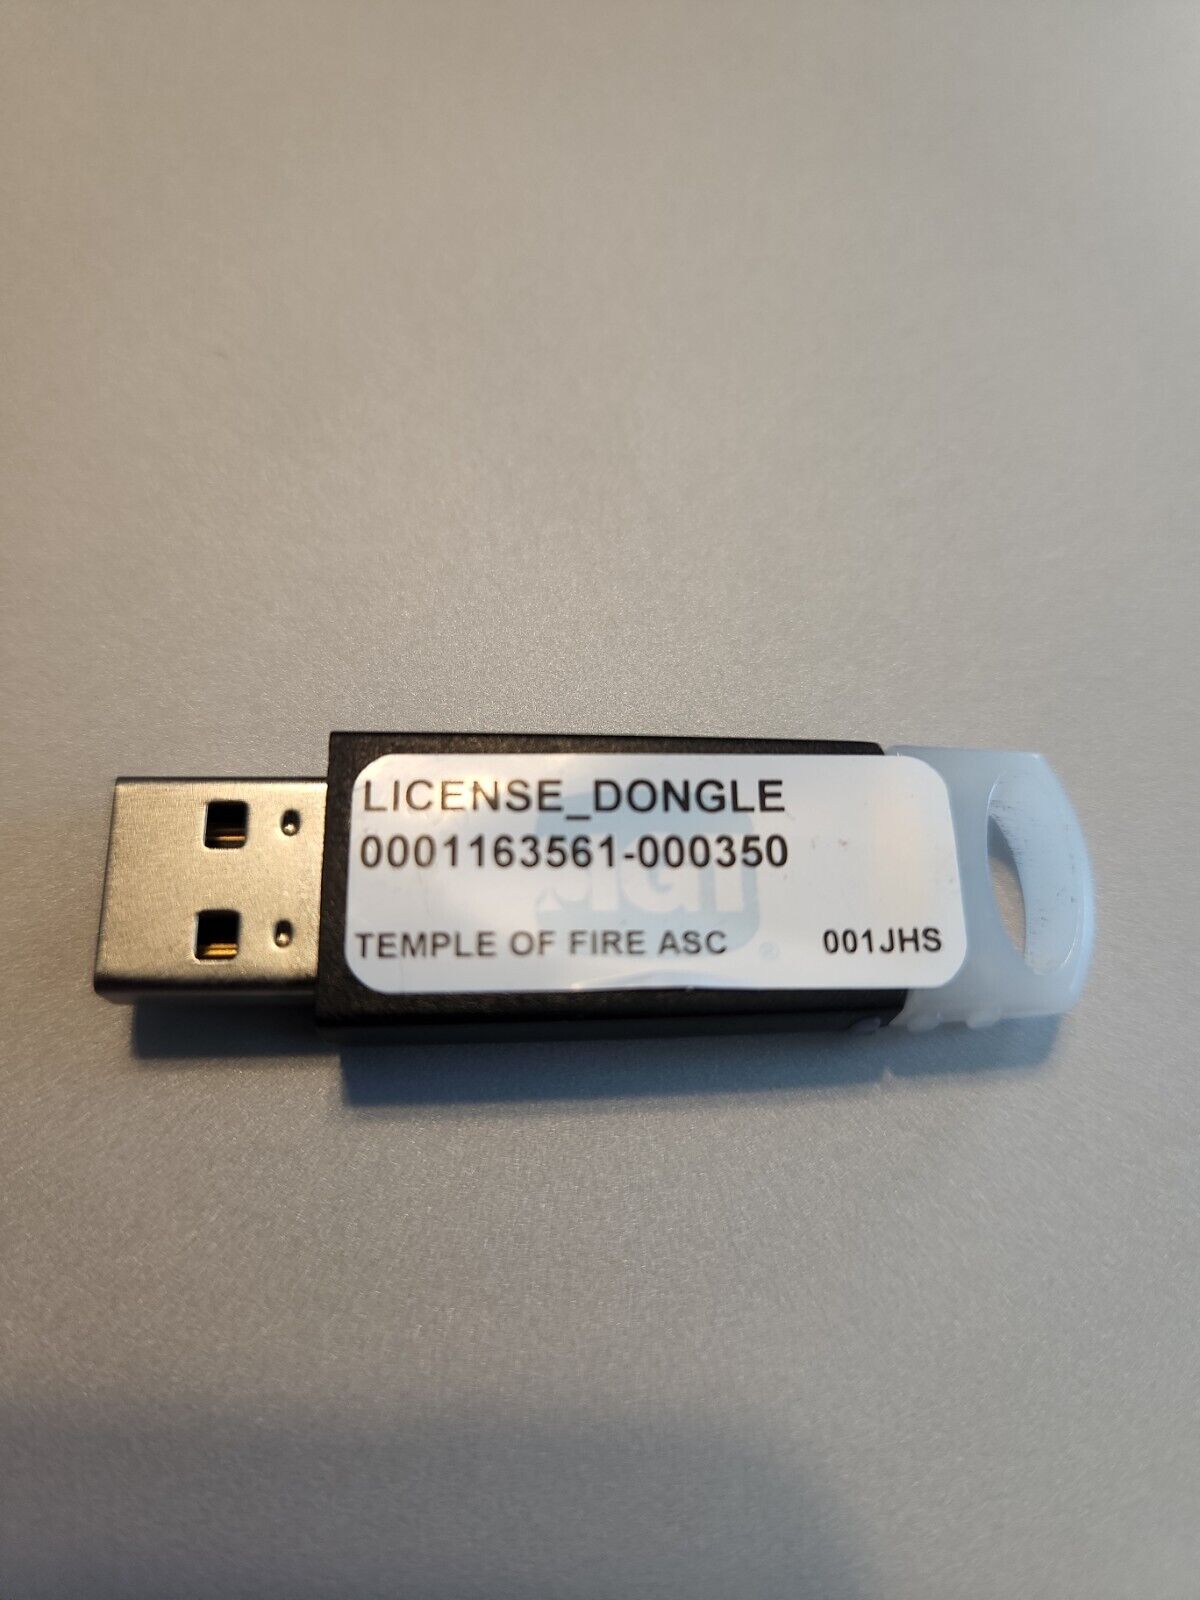 1 IGT LICENSE DONGLE ONLY TEMPLE OF FIRE 001JHS FAMILY 20 CRYSTAL CORE